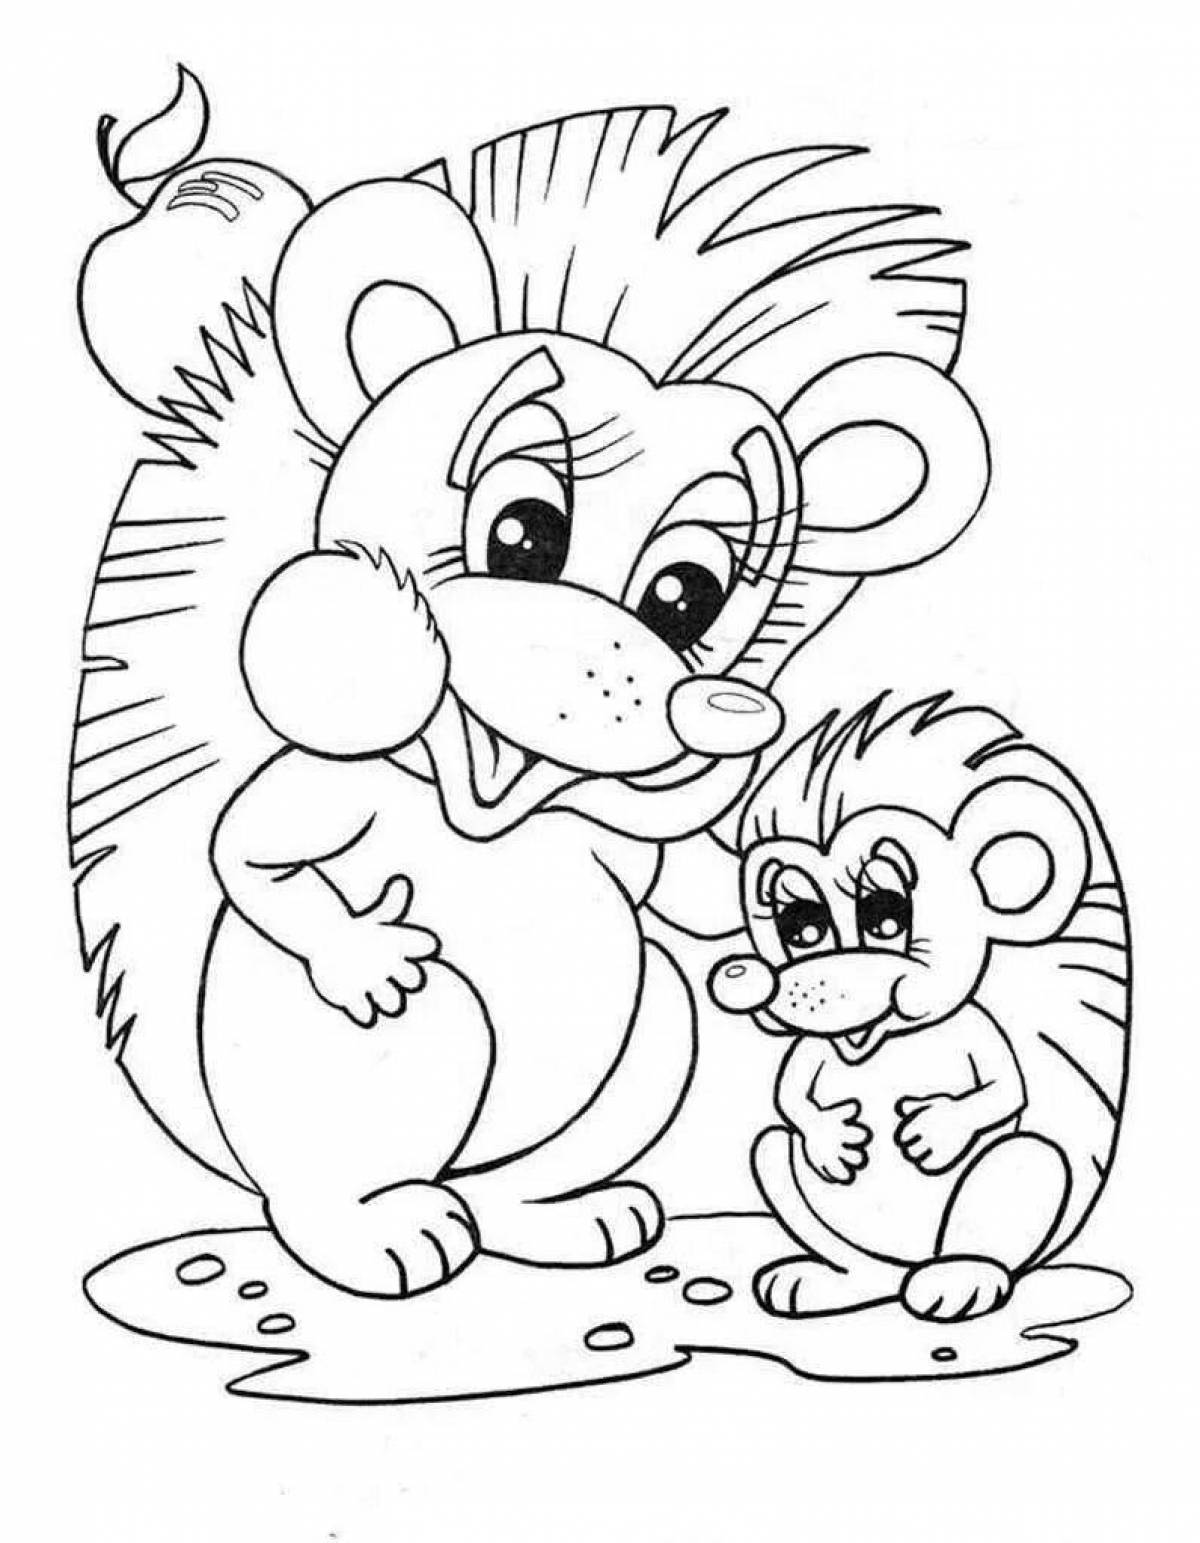 Fluffy coloring pages small animals